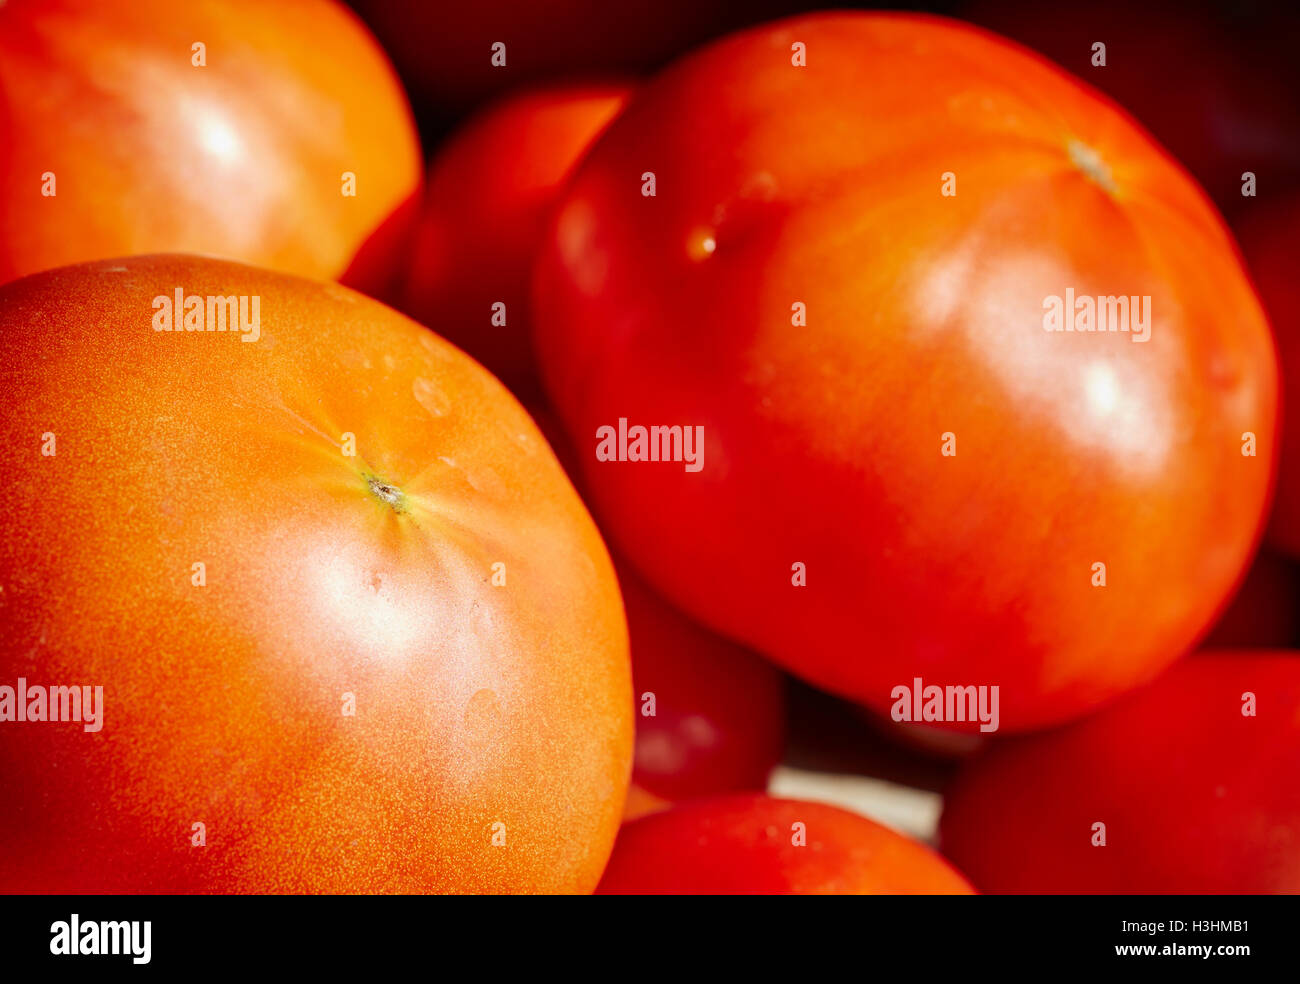 Beefsteak tomatoes for sale at a Lancaster County, Pennsylvania farm stand Stock Photo